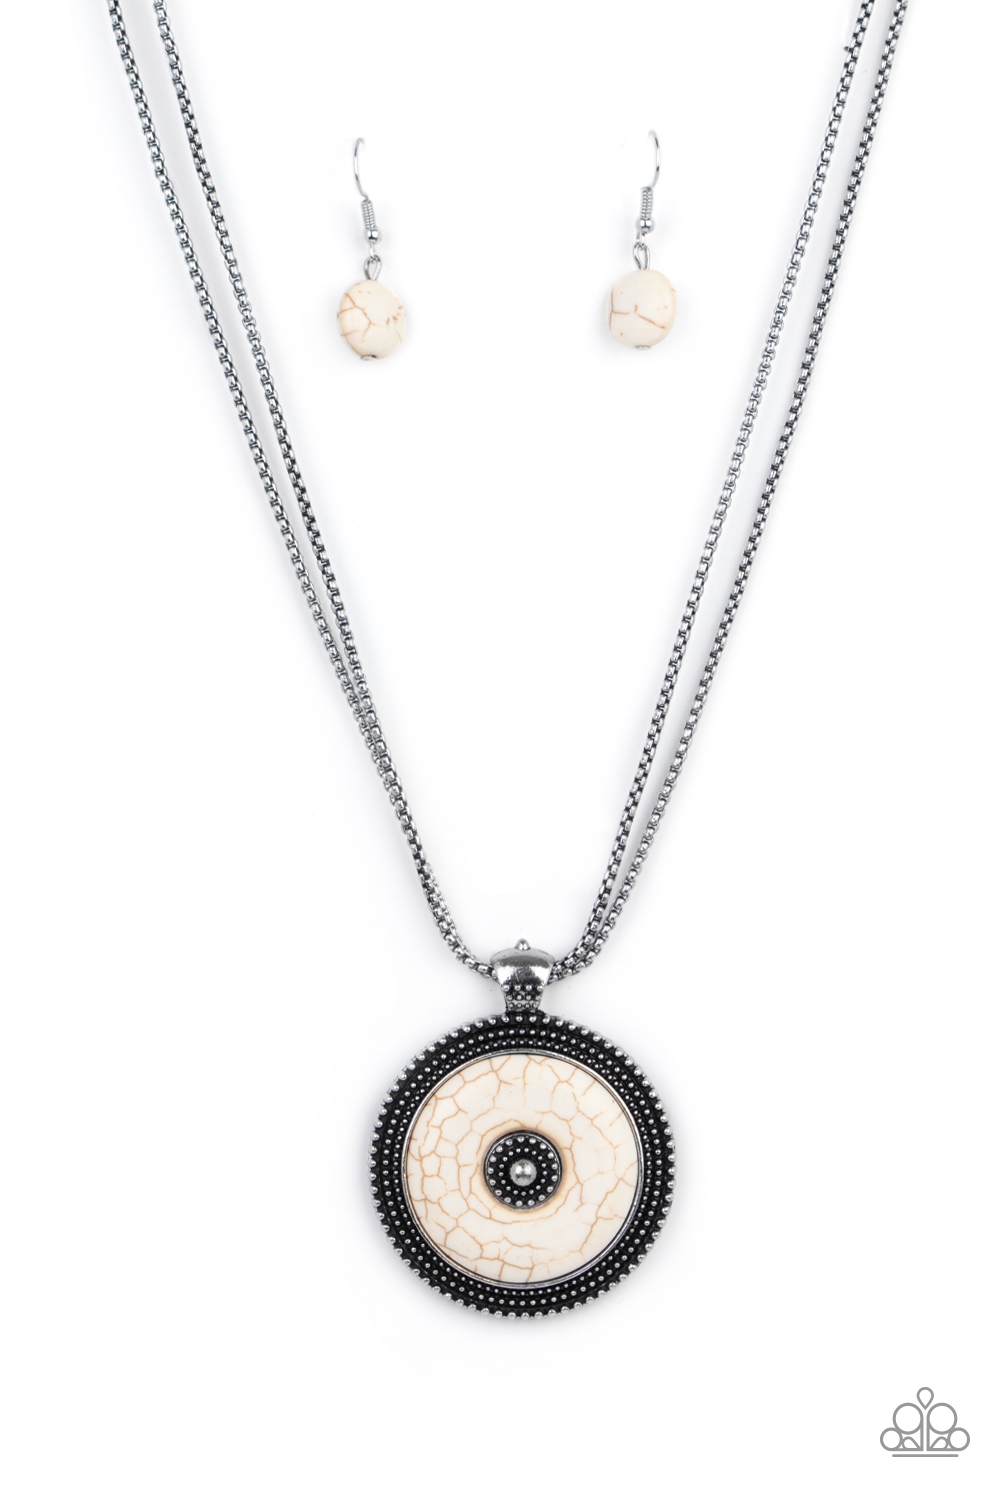 Necklace - EPICENTER of Attention - White